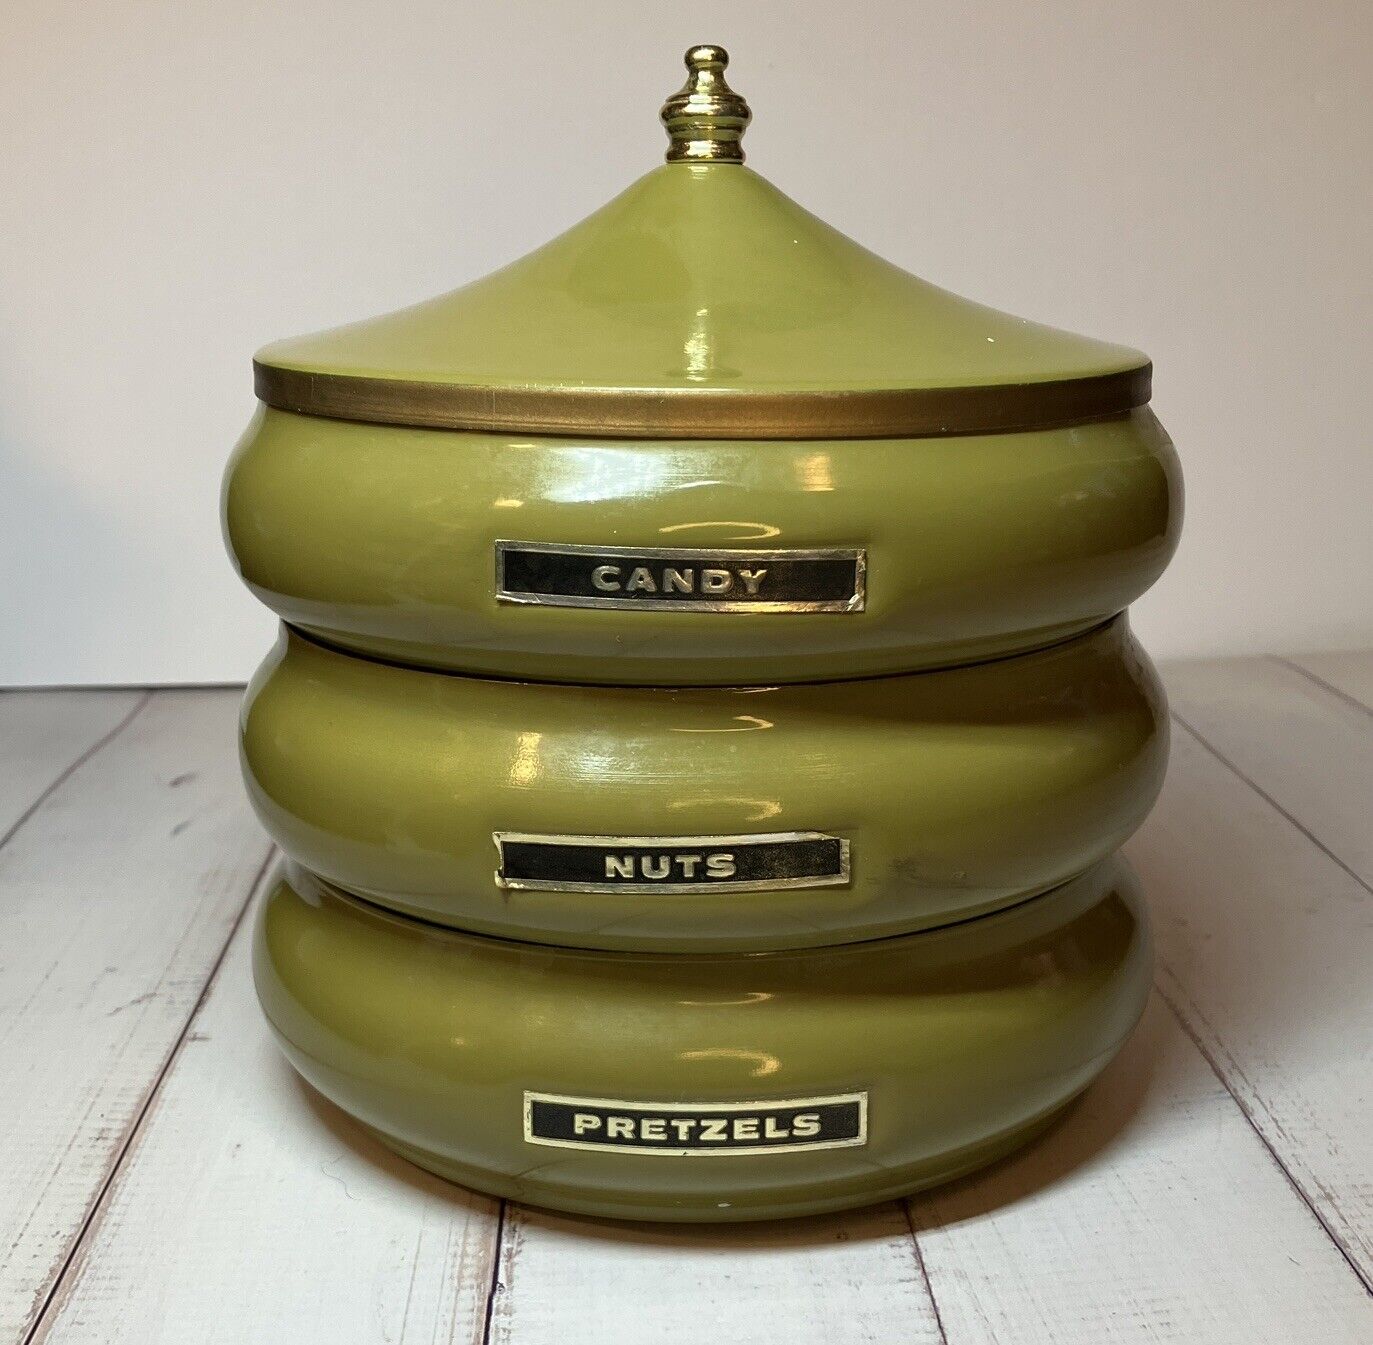 Vintage MCM Avocado Green Stacking Metal Snack Canister Candy Nuts Pretzels FLAW